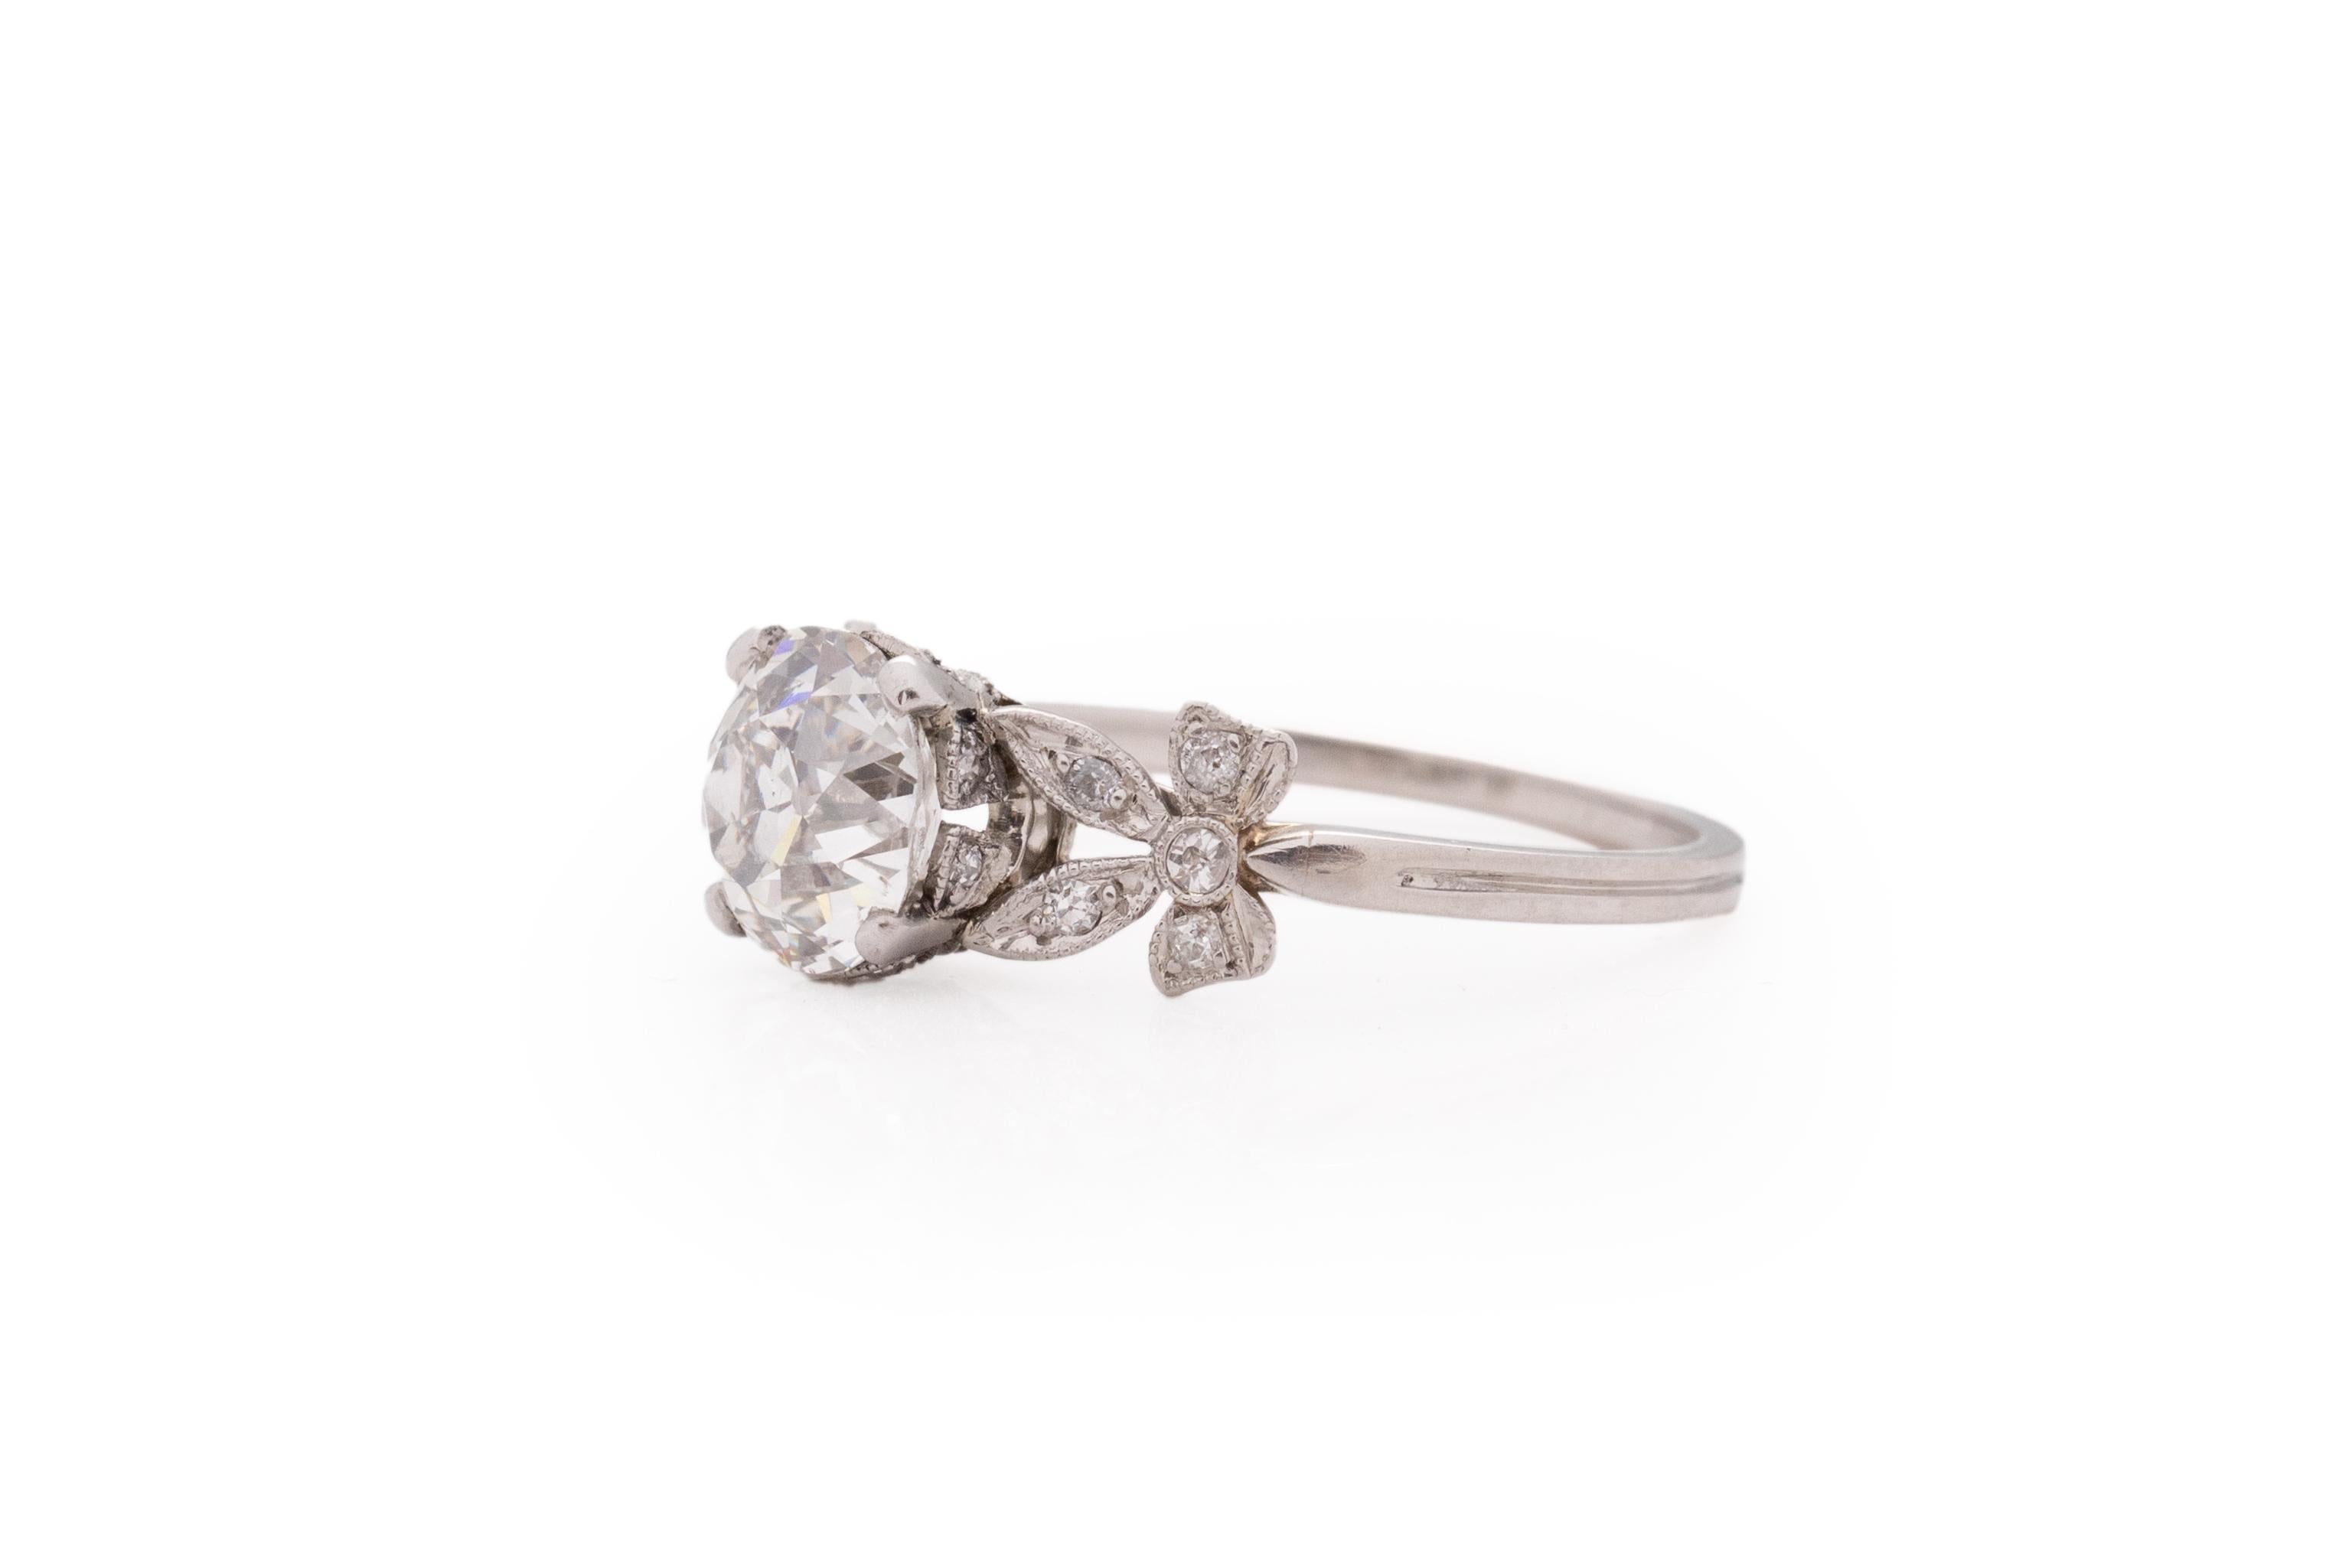 Ring Size: 6.25
Metal Type: Platinum [Hallmarked, and Tested]
Weight: 3.2 grams

Center Diamond Details:
GIA REPORT #:6382414112
Weight: 1.62 carat
Cut: Antique Cushion
Color: J
Clarity: SI2
Measurements: mm

Side Stone Details:
Weight: .15 carat,